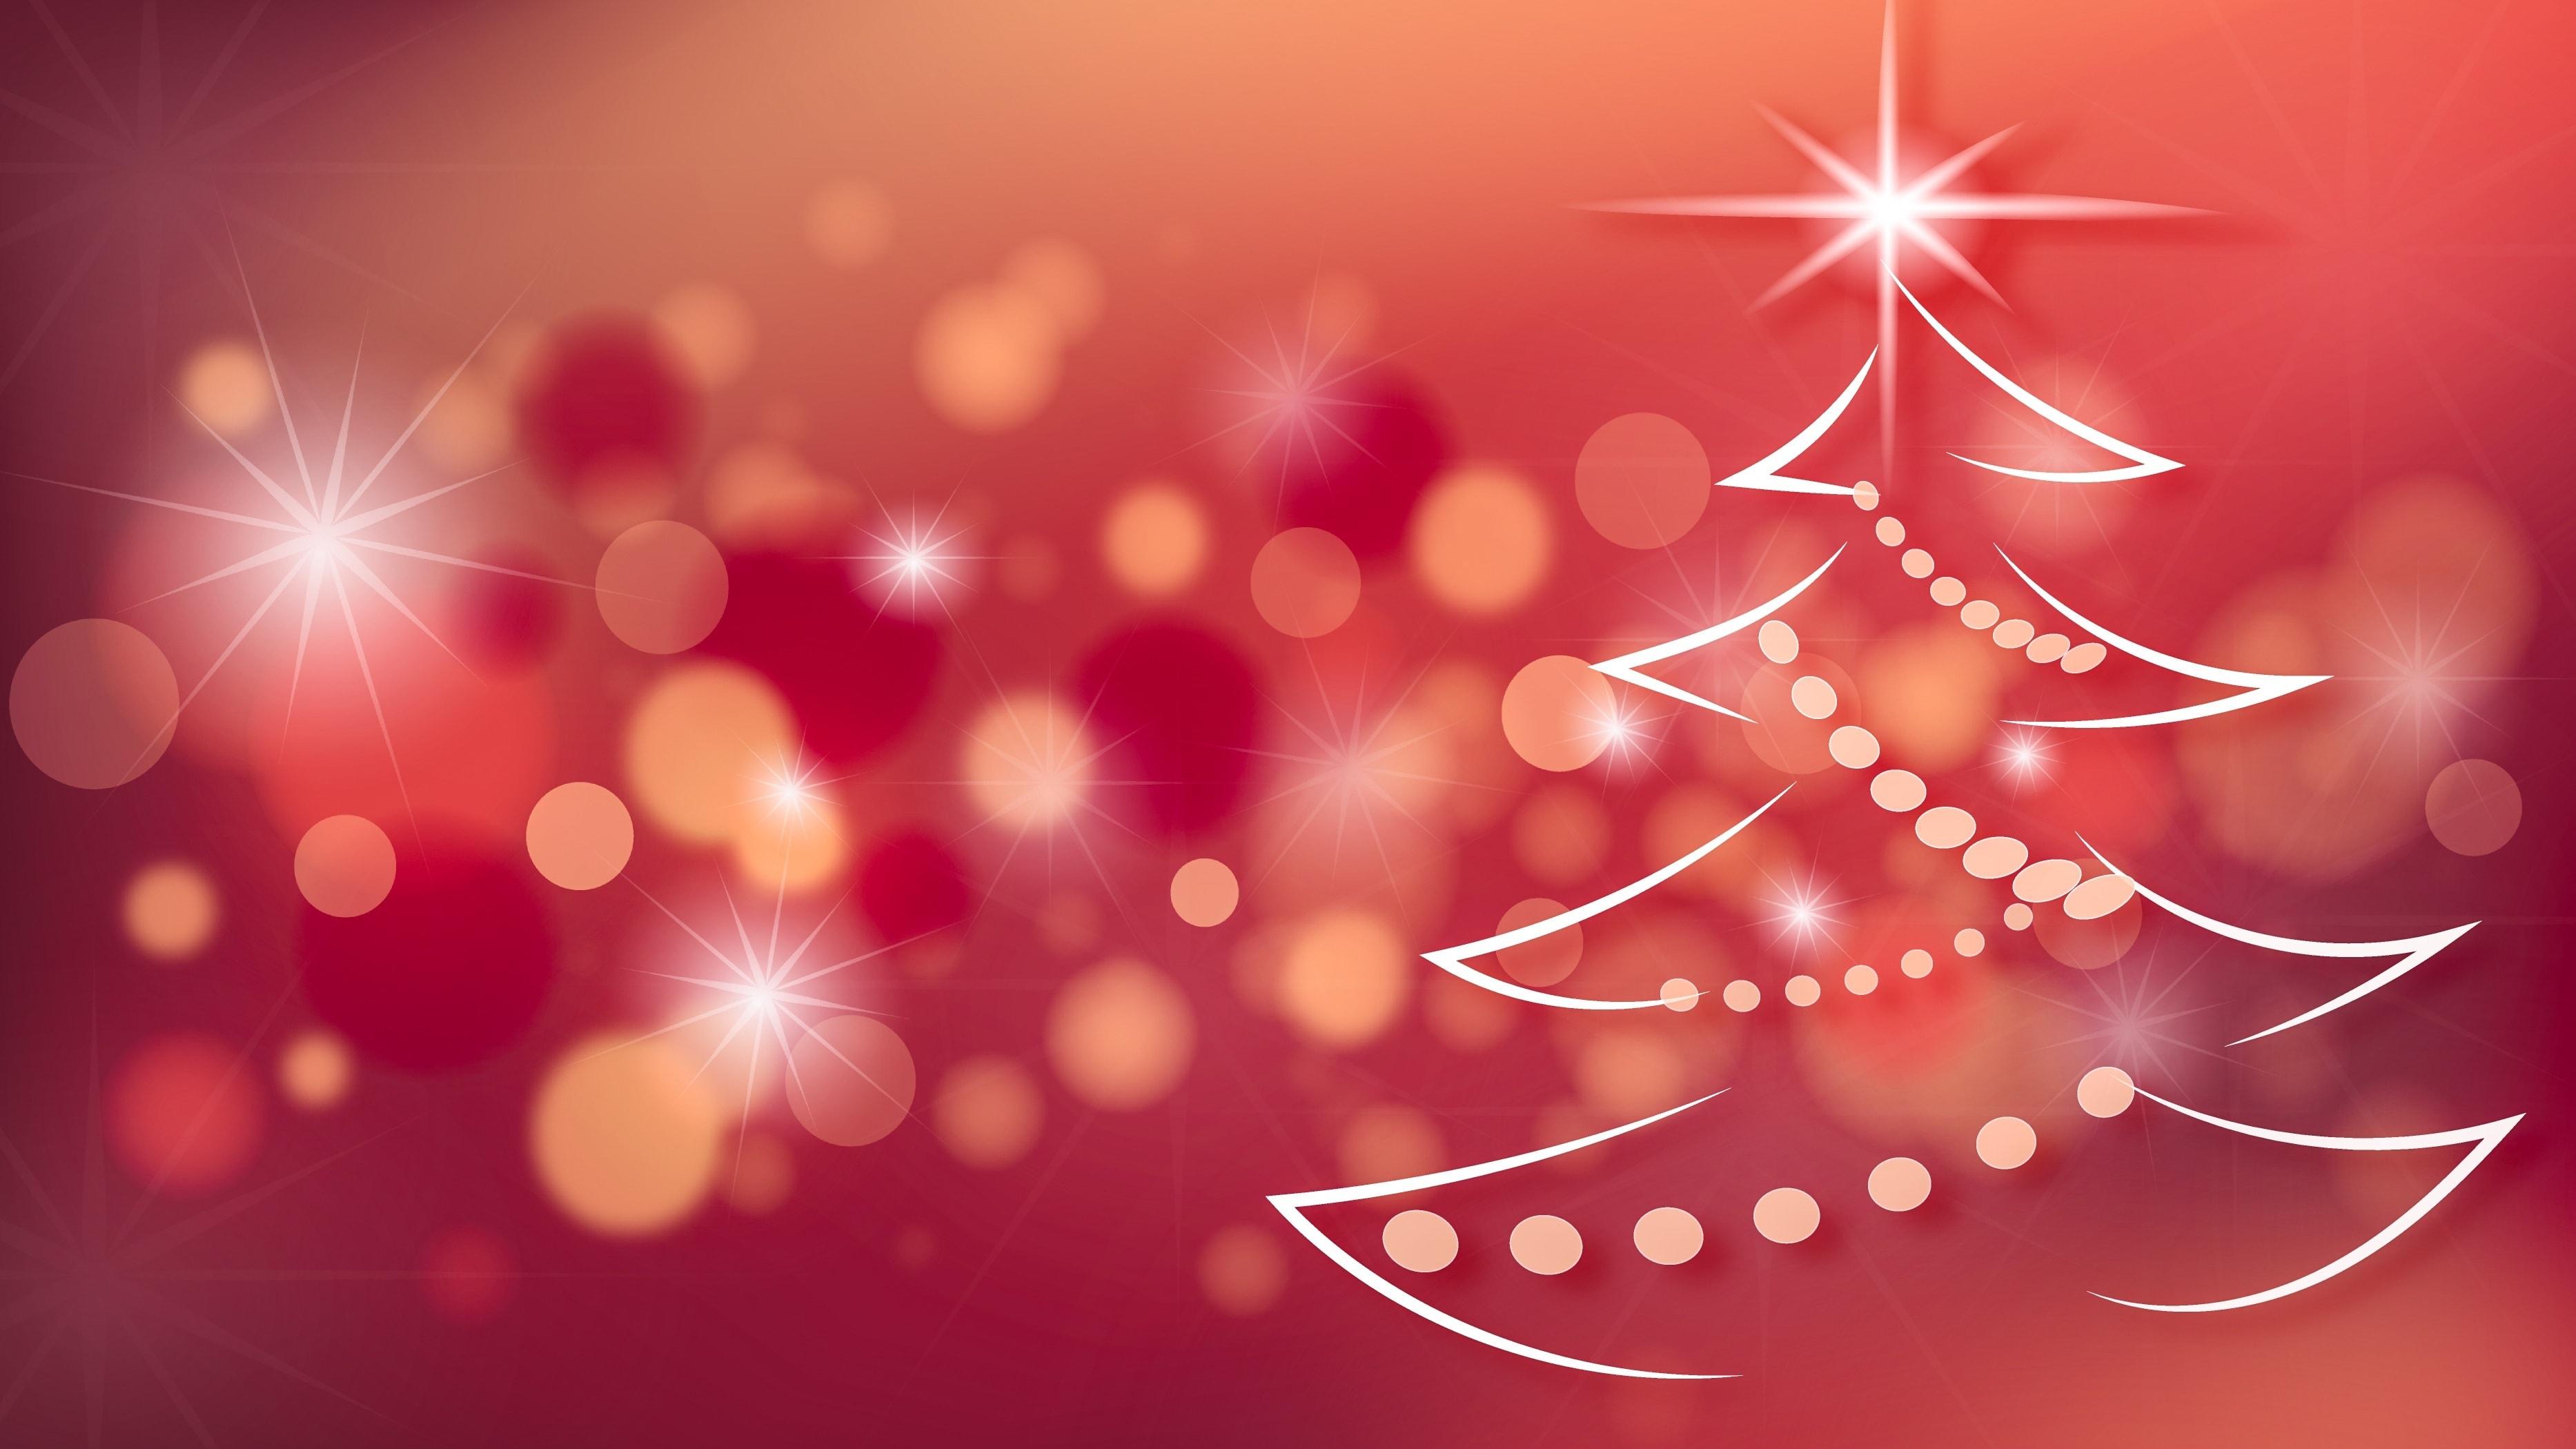 Red Christmas Tree Background 4k Wallpaper and Free